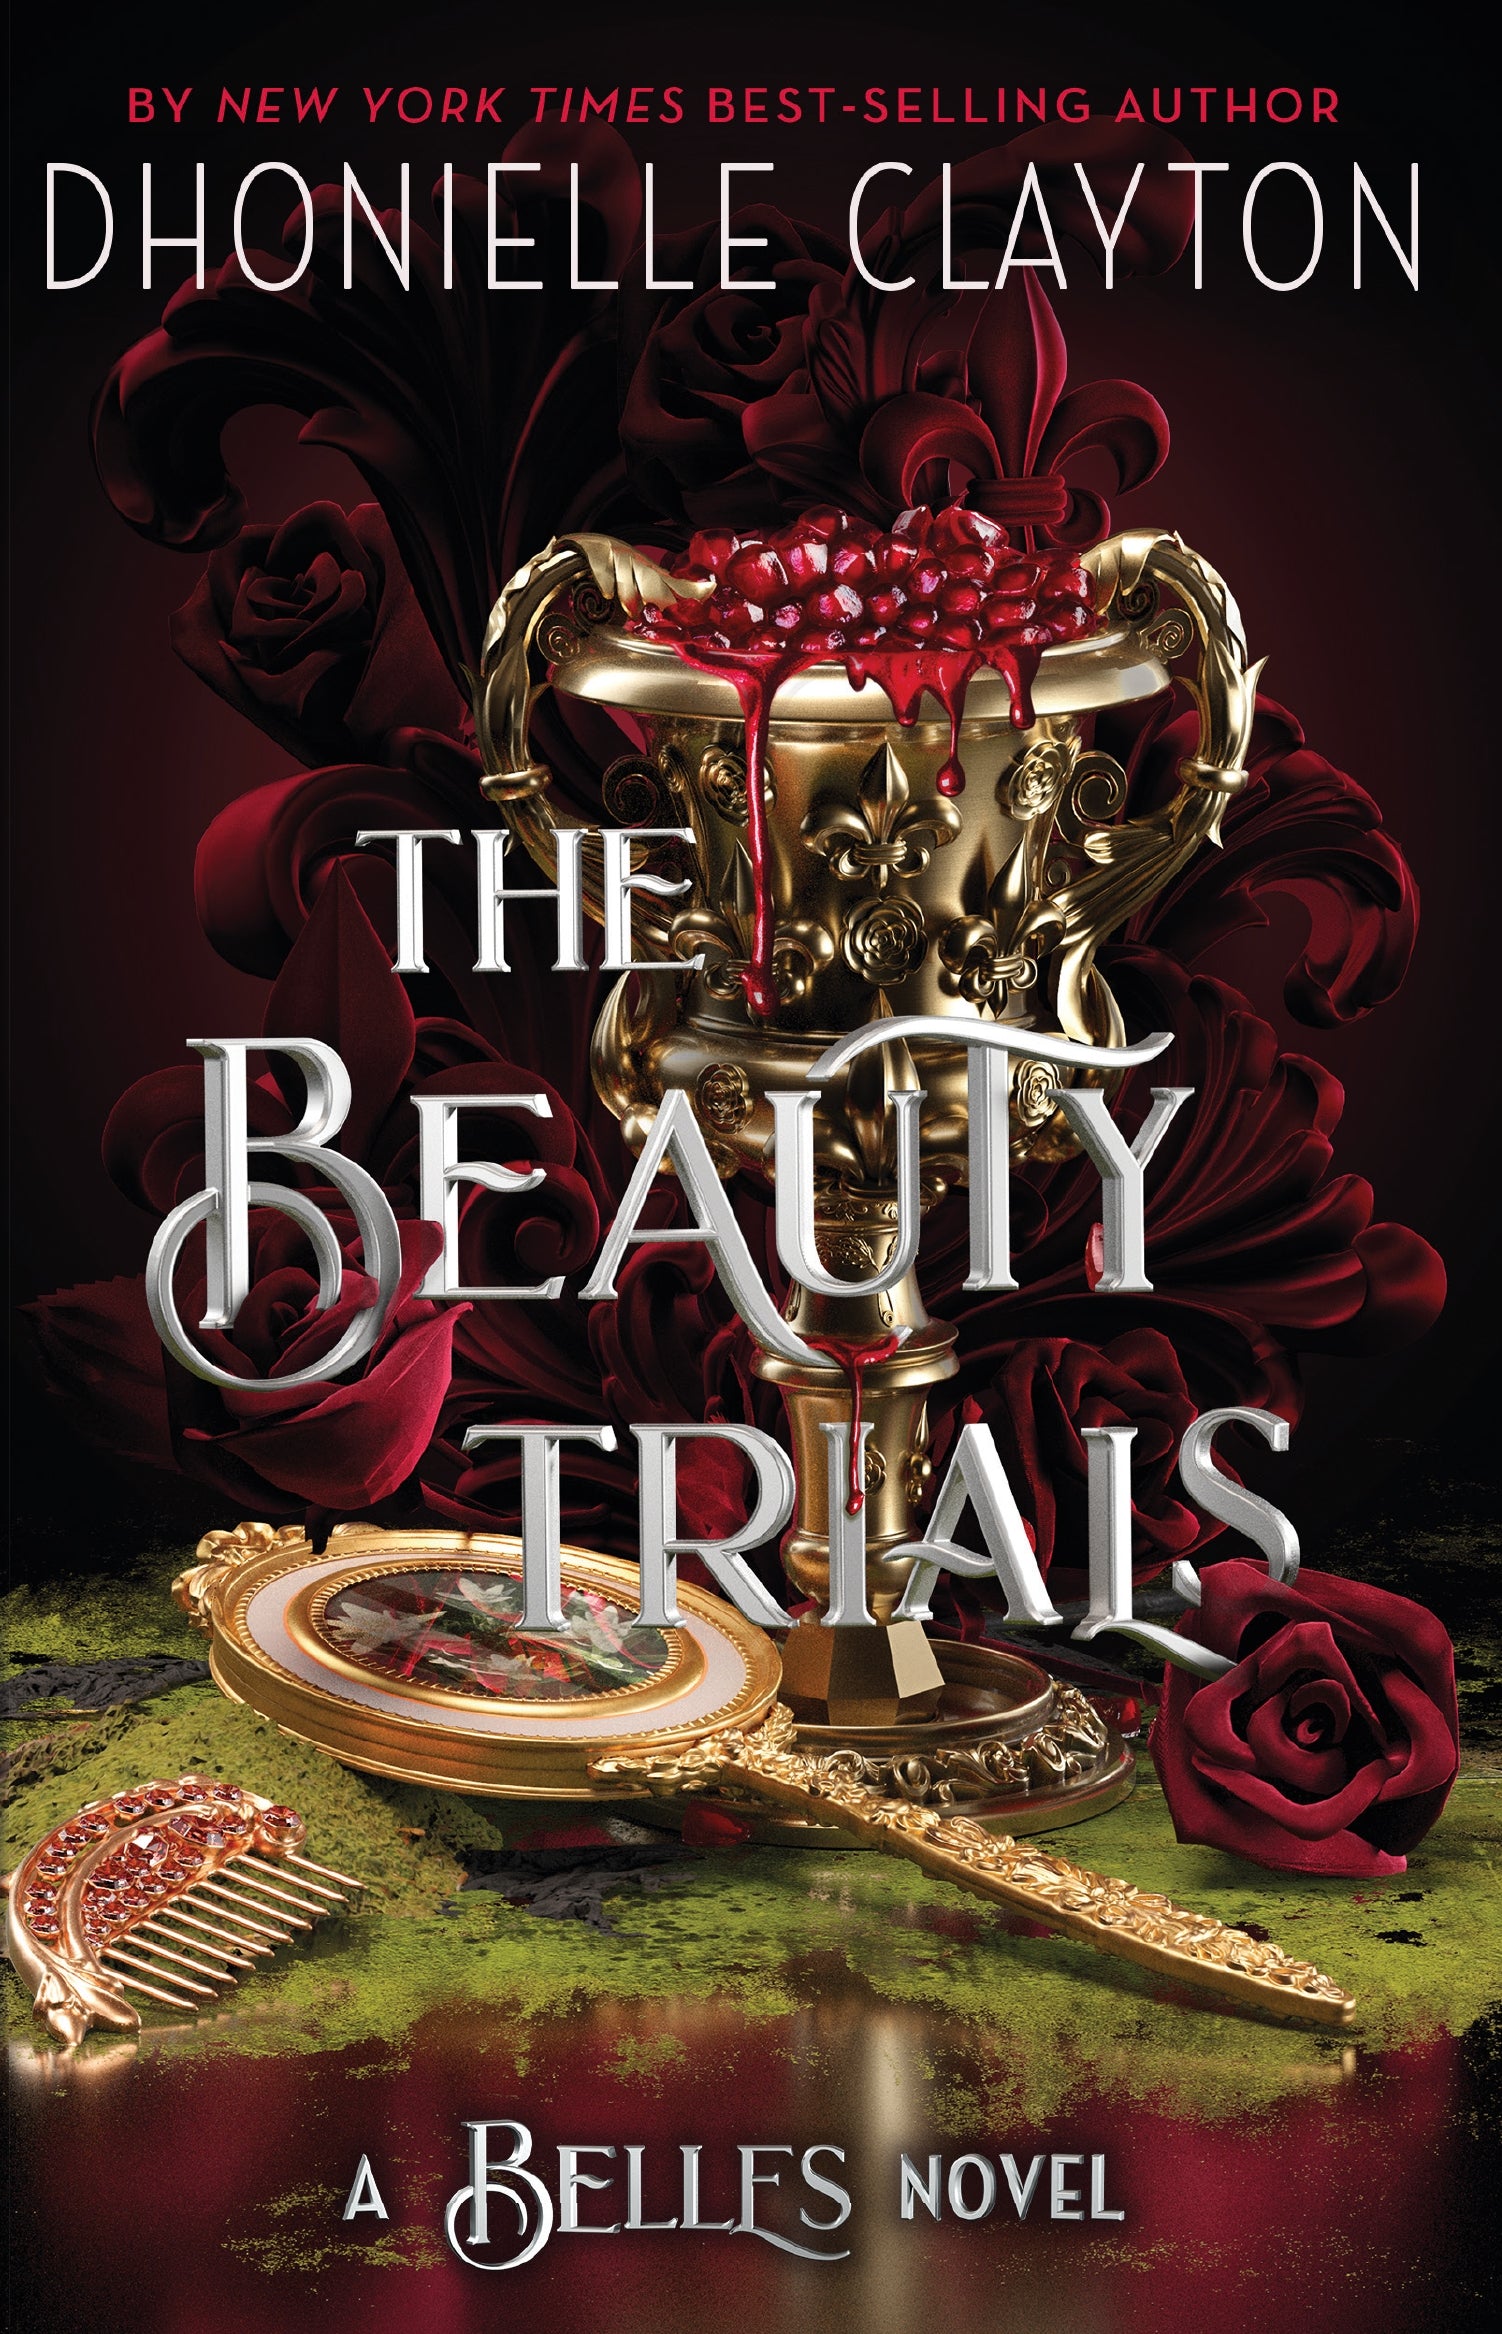 The Beauty Trials by Dhonielle Clayton